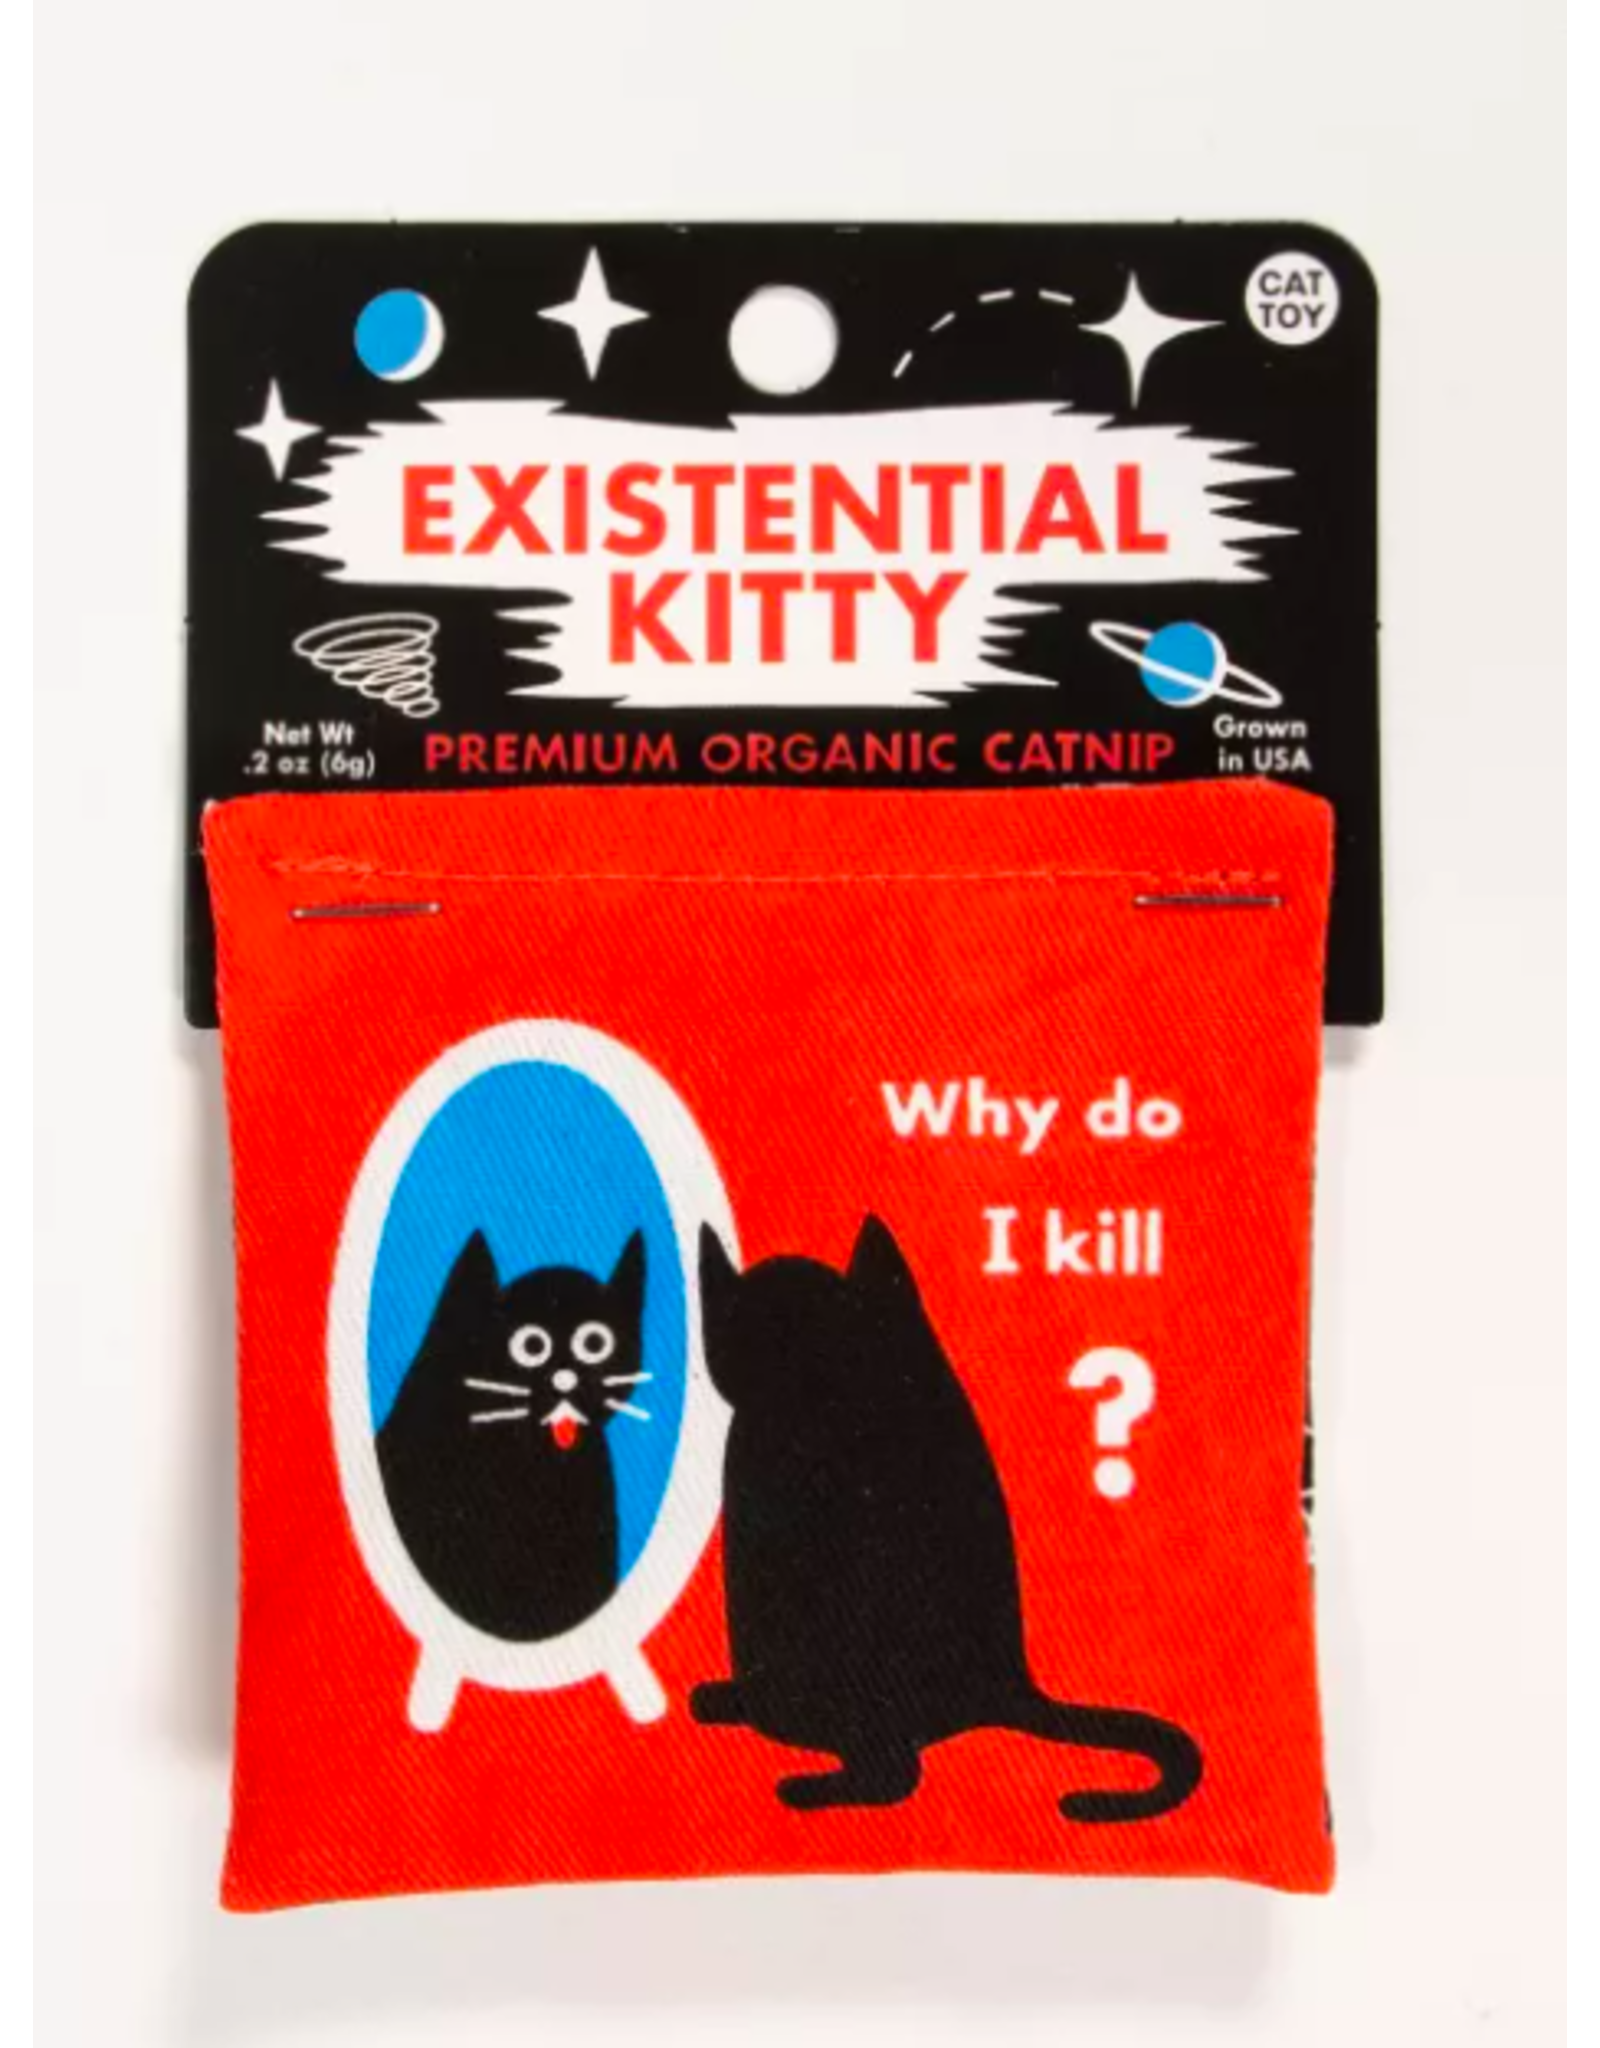 BGS Blue Q - Catnip Toy / Existential Kitty